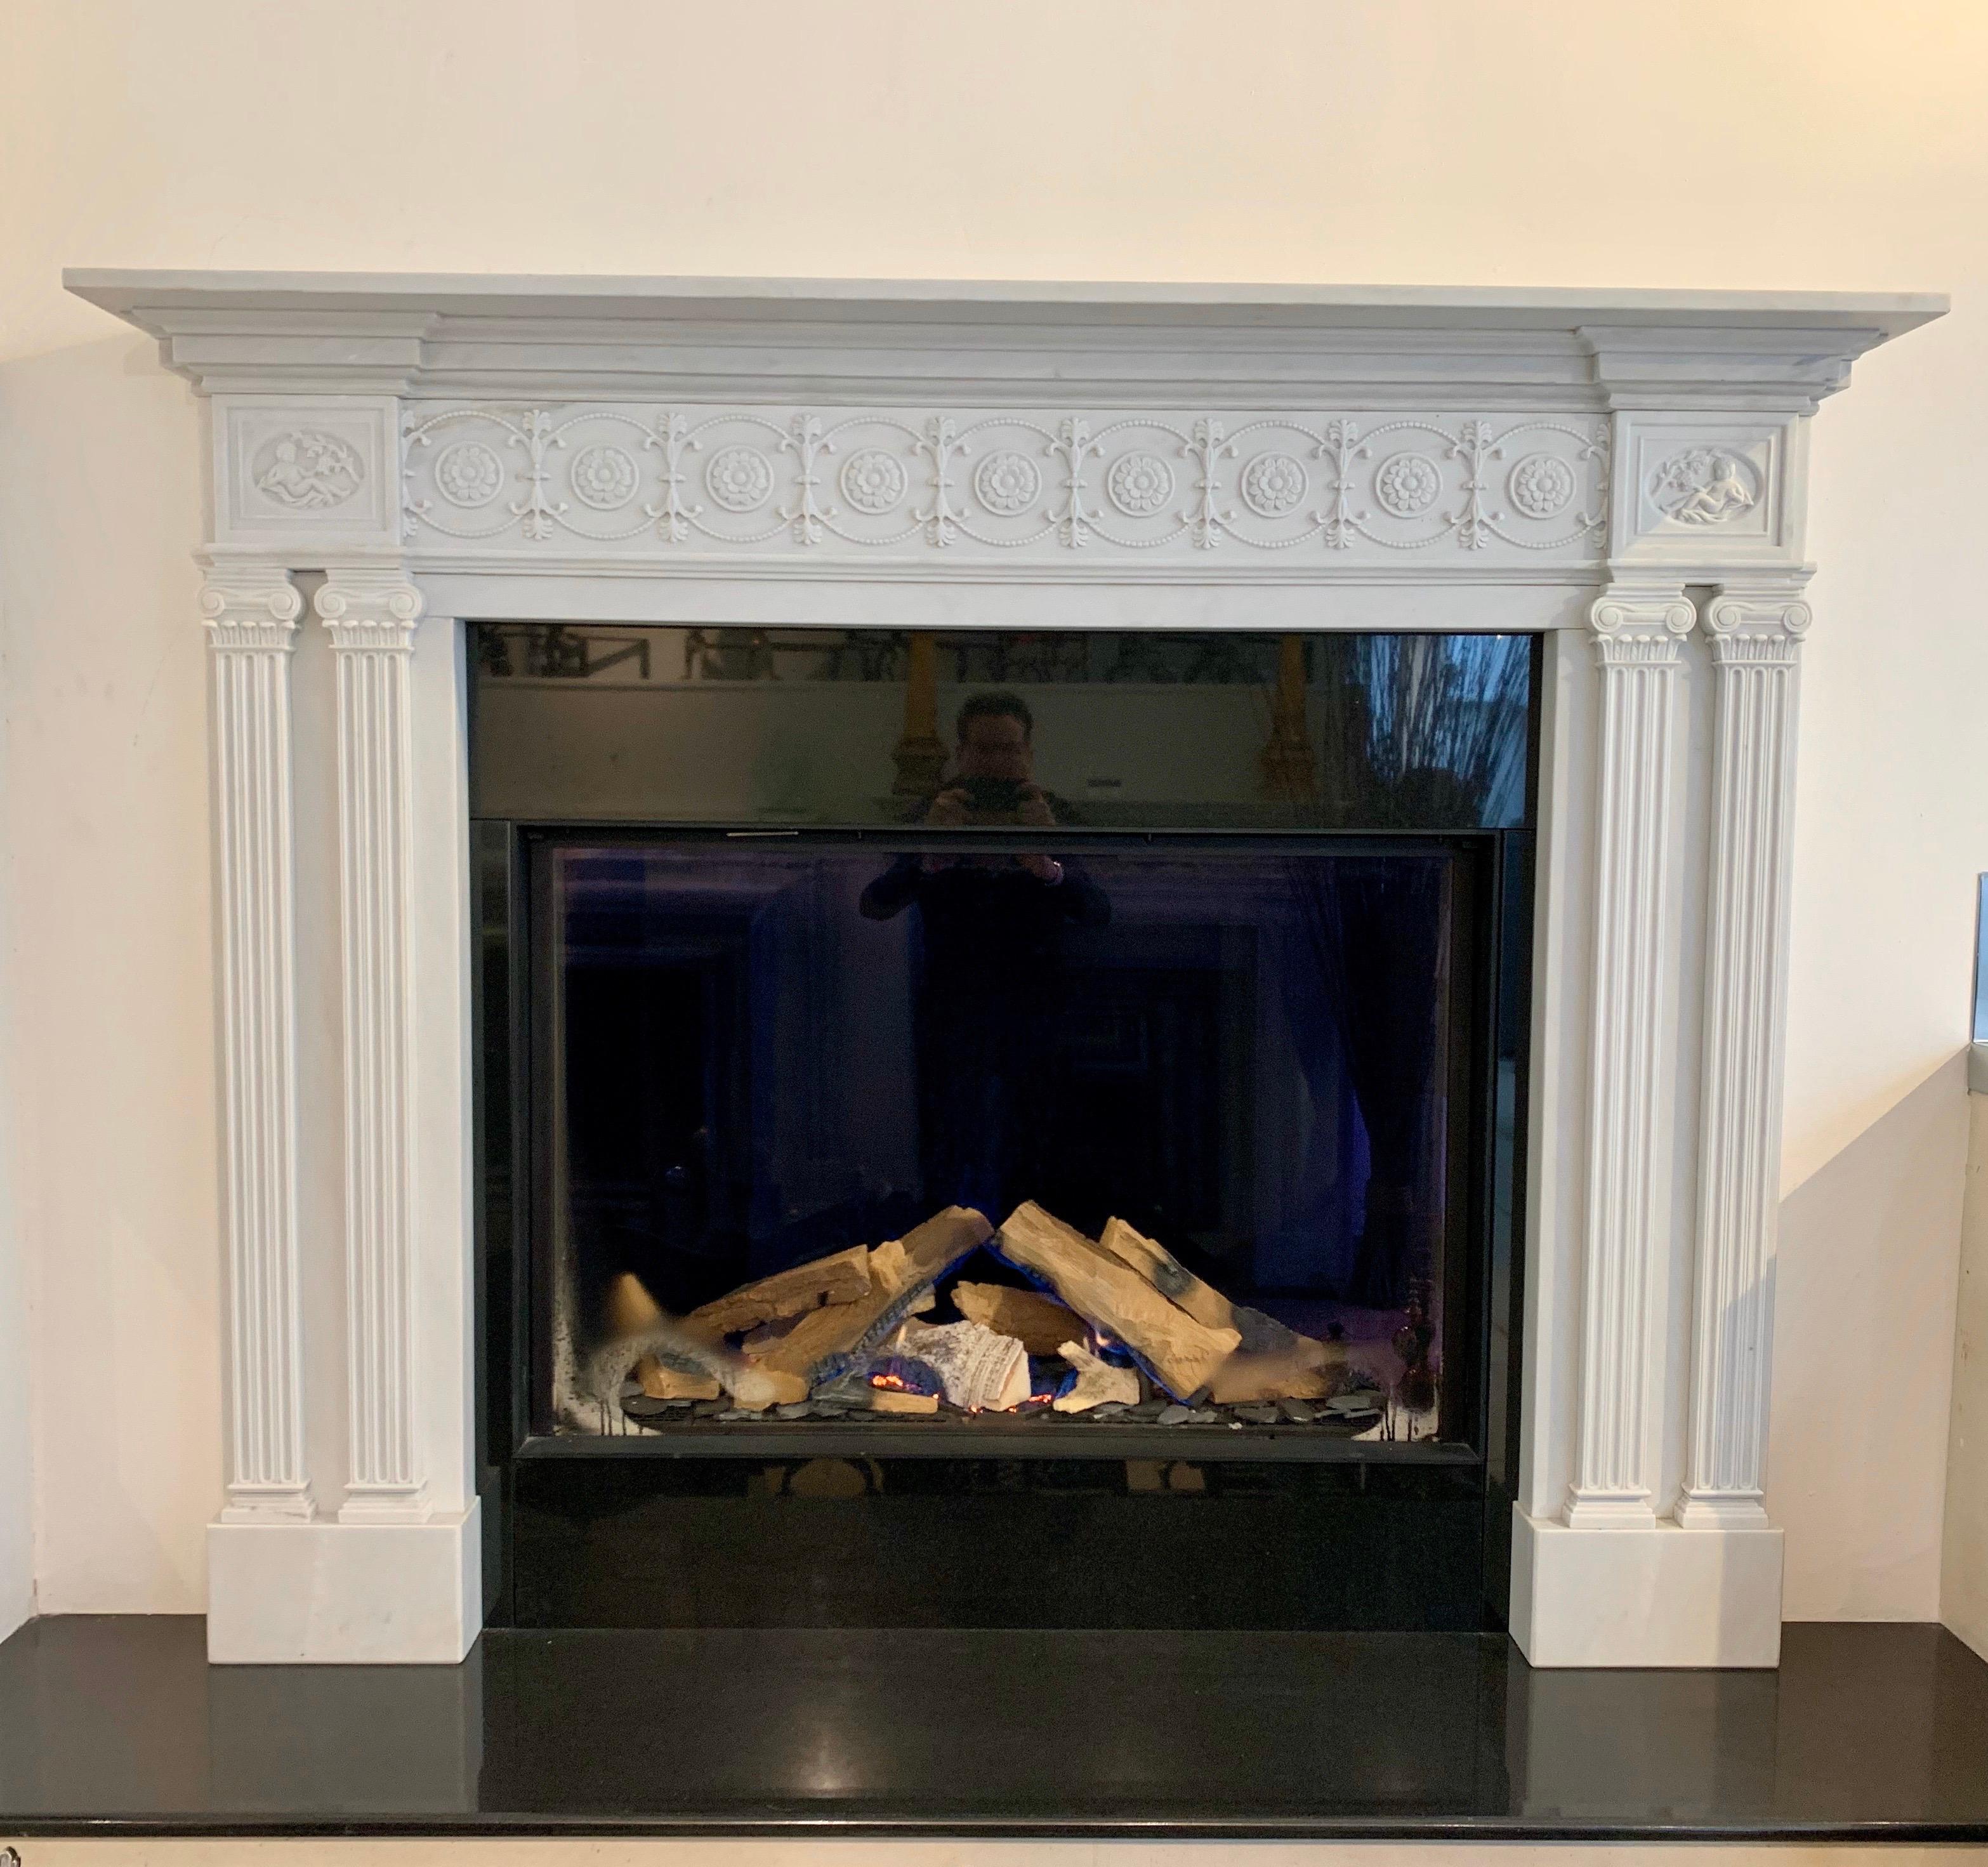 Unique fireplace produced under license from kenwood house hampstead, London. By acquisitions for its recent heritage collection.
A marvel in marble, this unusual chimney-piece is inspired by a mid-1790s original in the middle bedroom at kenwood